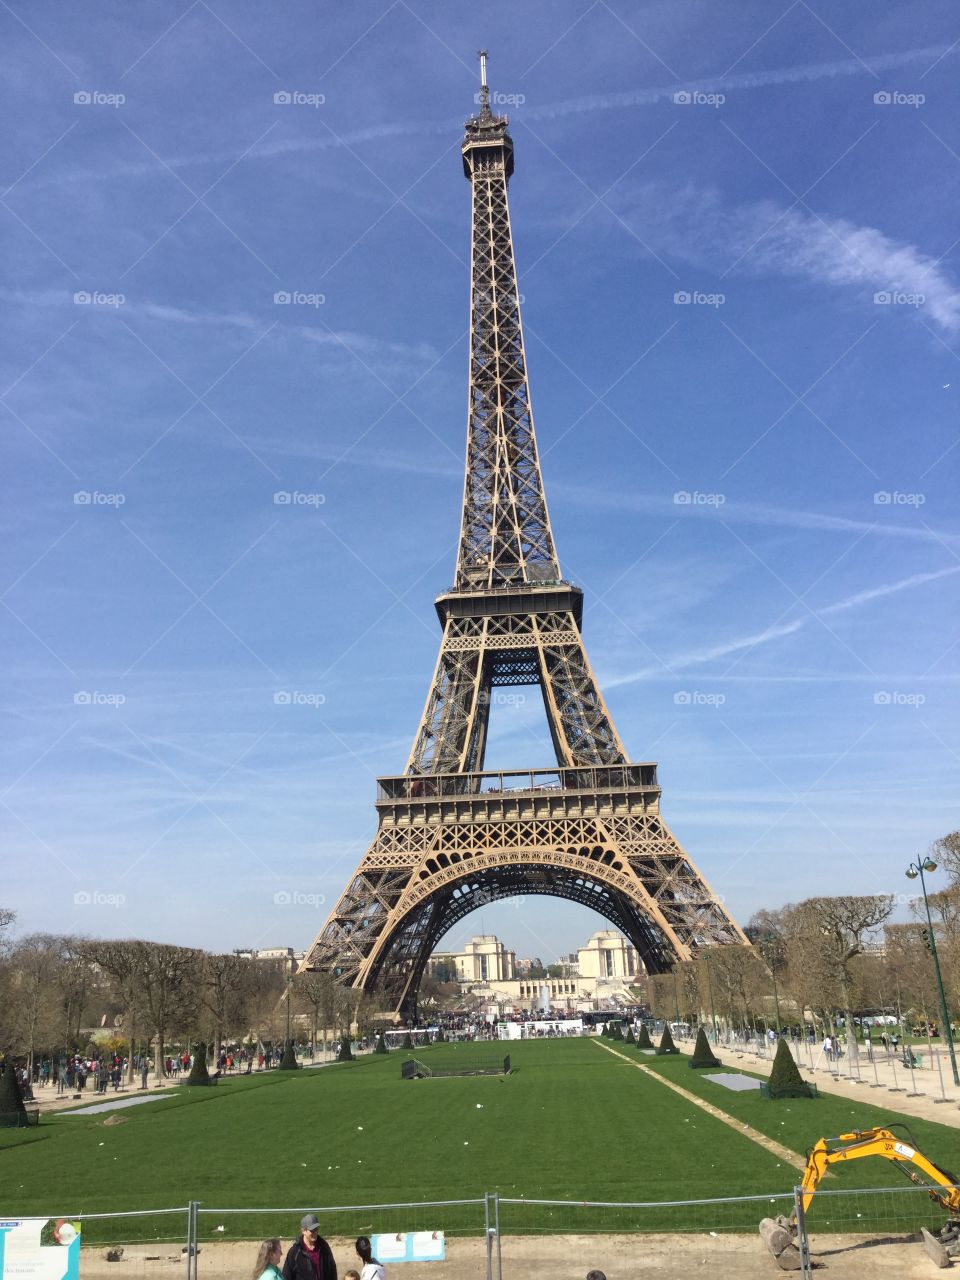 The clouds drawing the Eiffel Tower